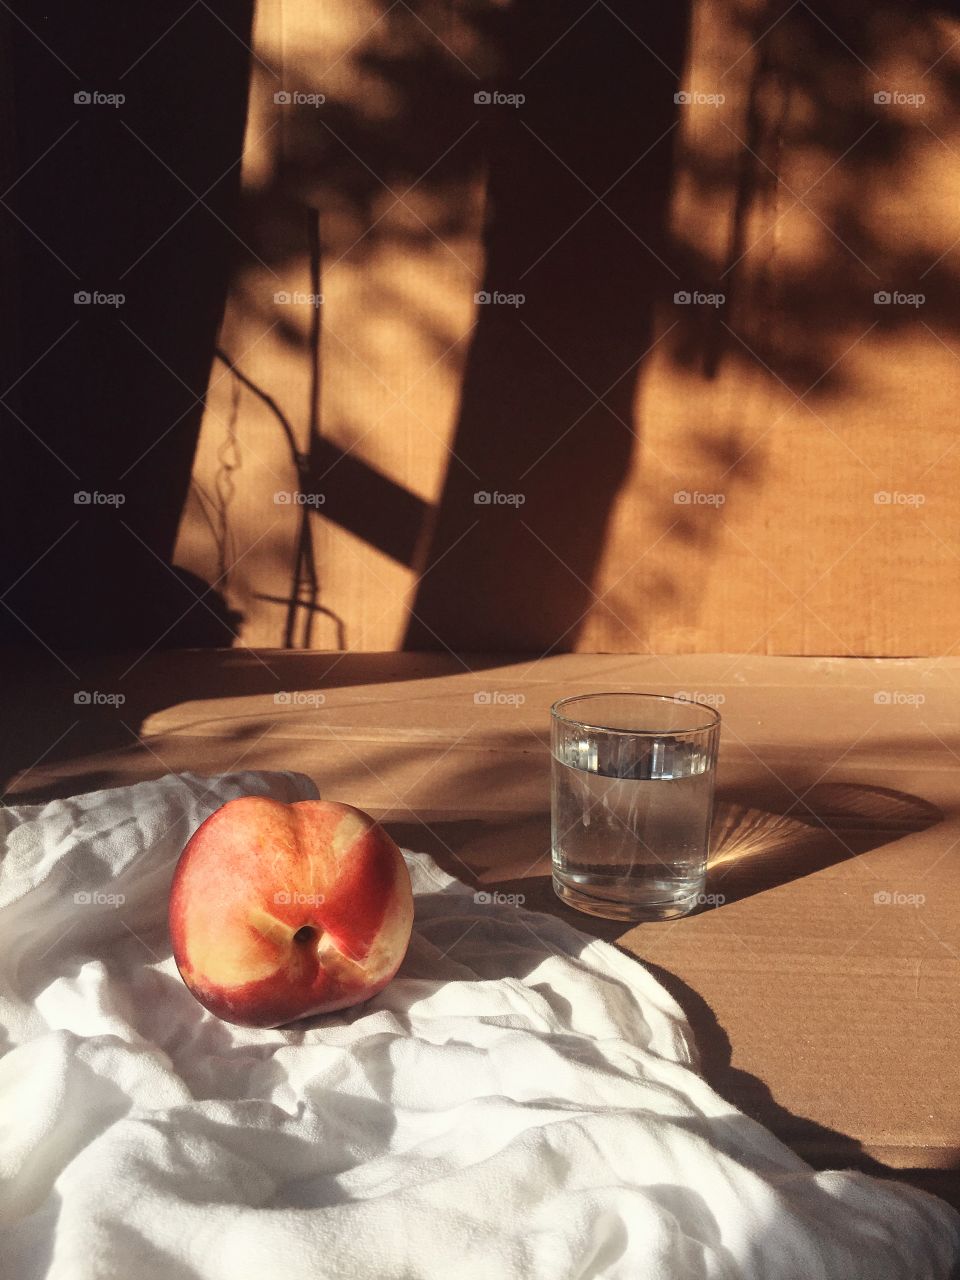 Peach and water 